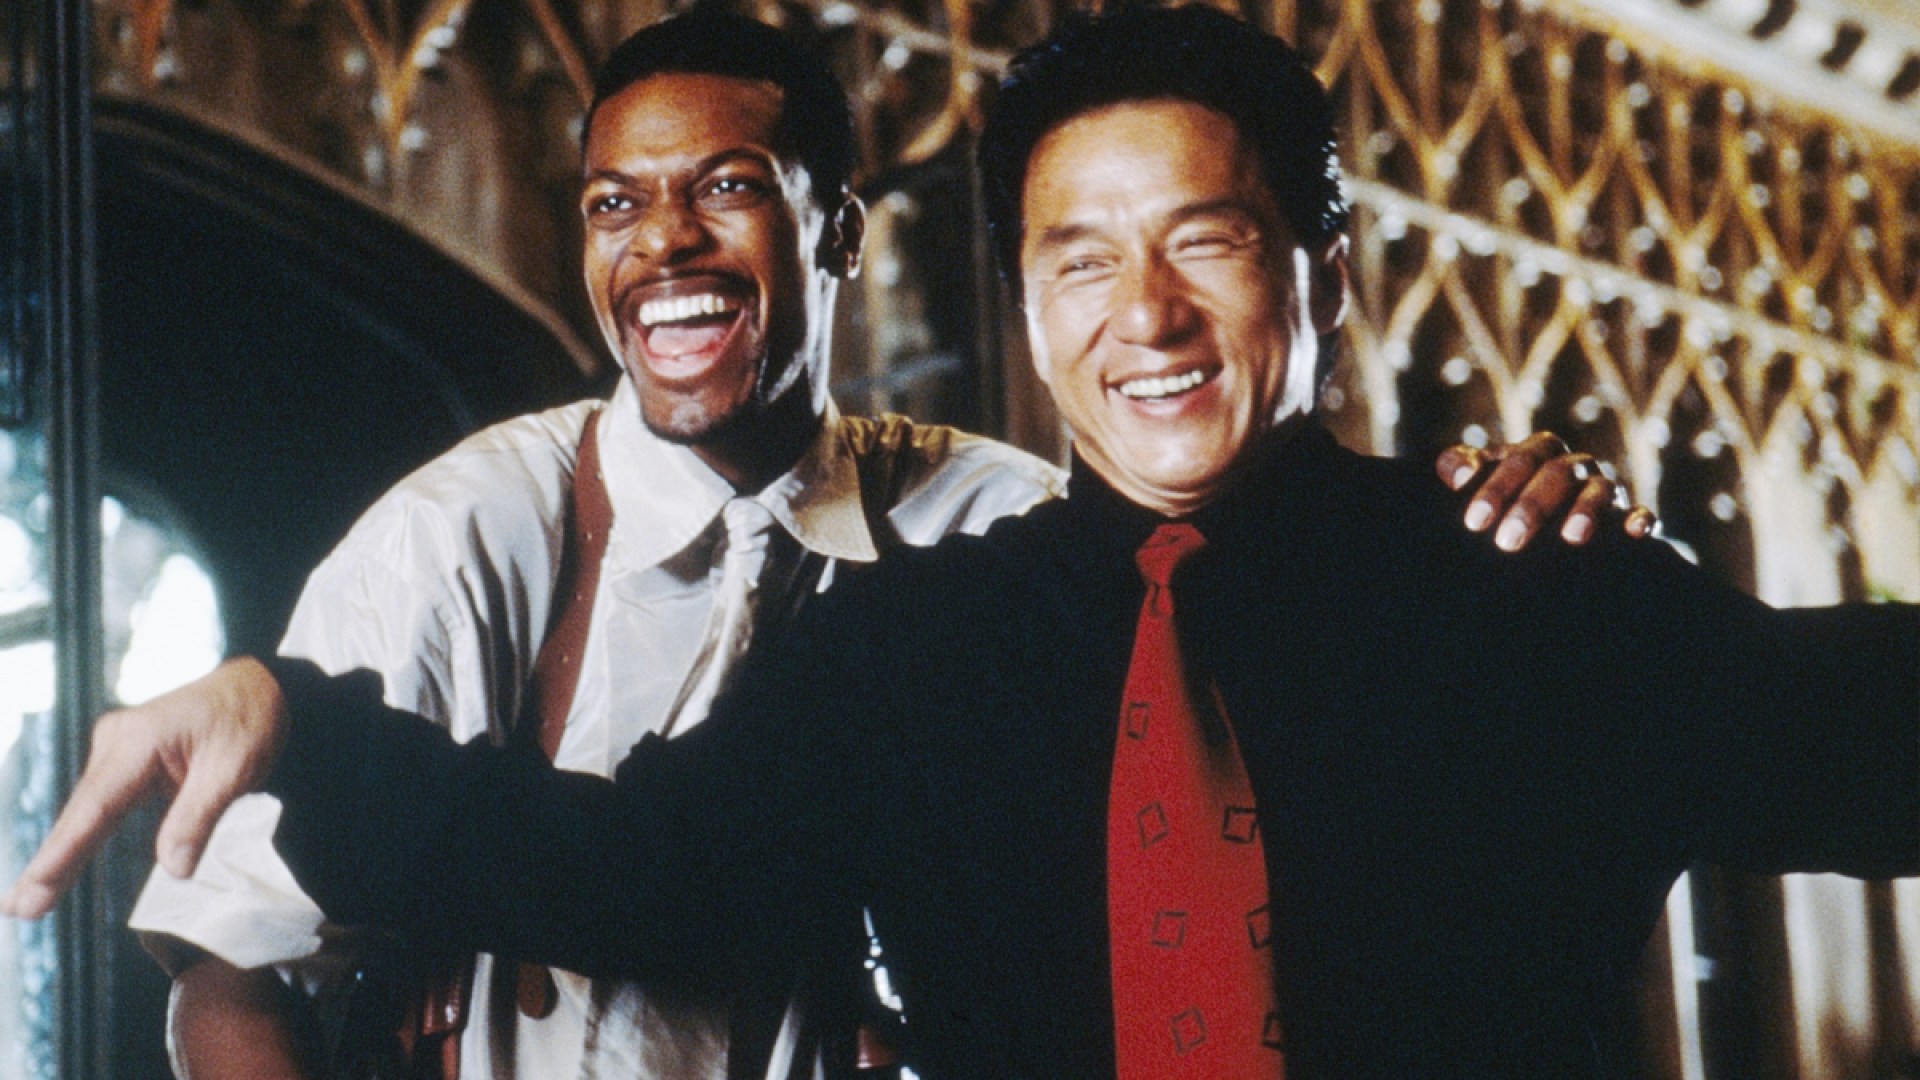 Buddy cops Lee and Carter laughing in with each other in "Rush Hour"